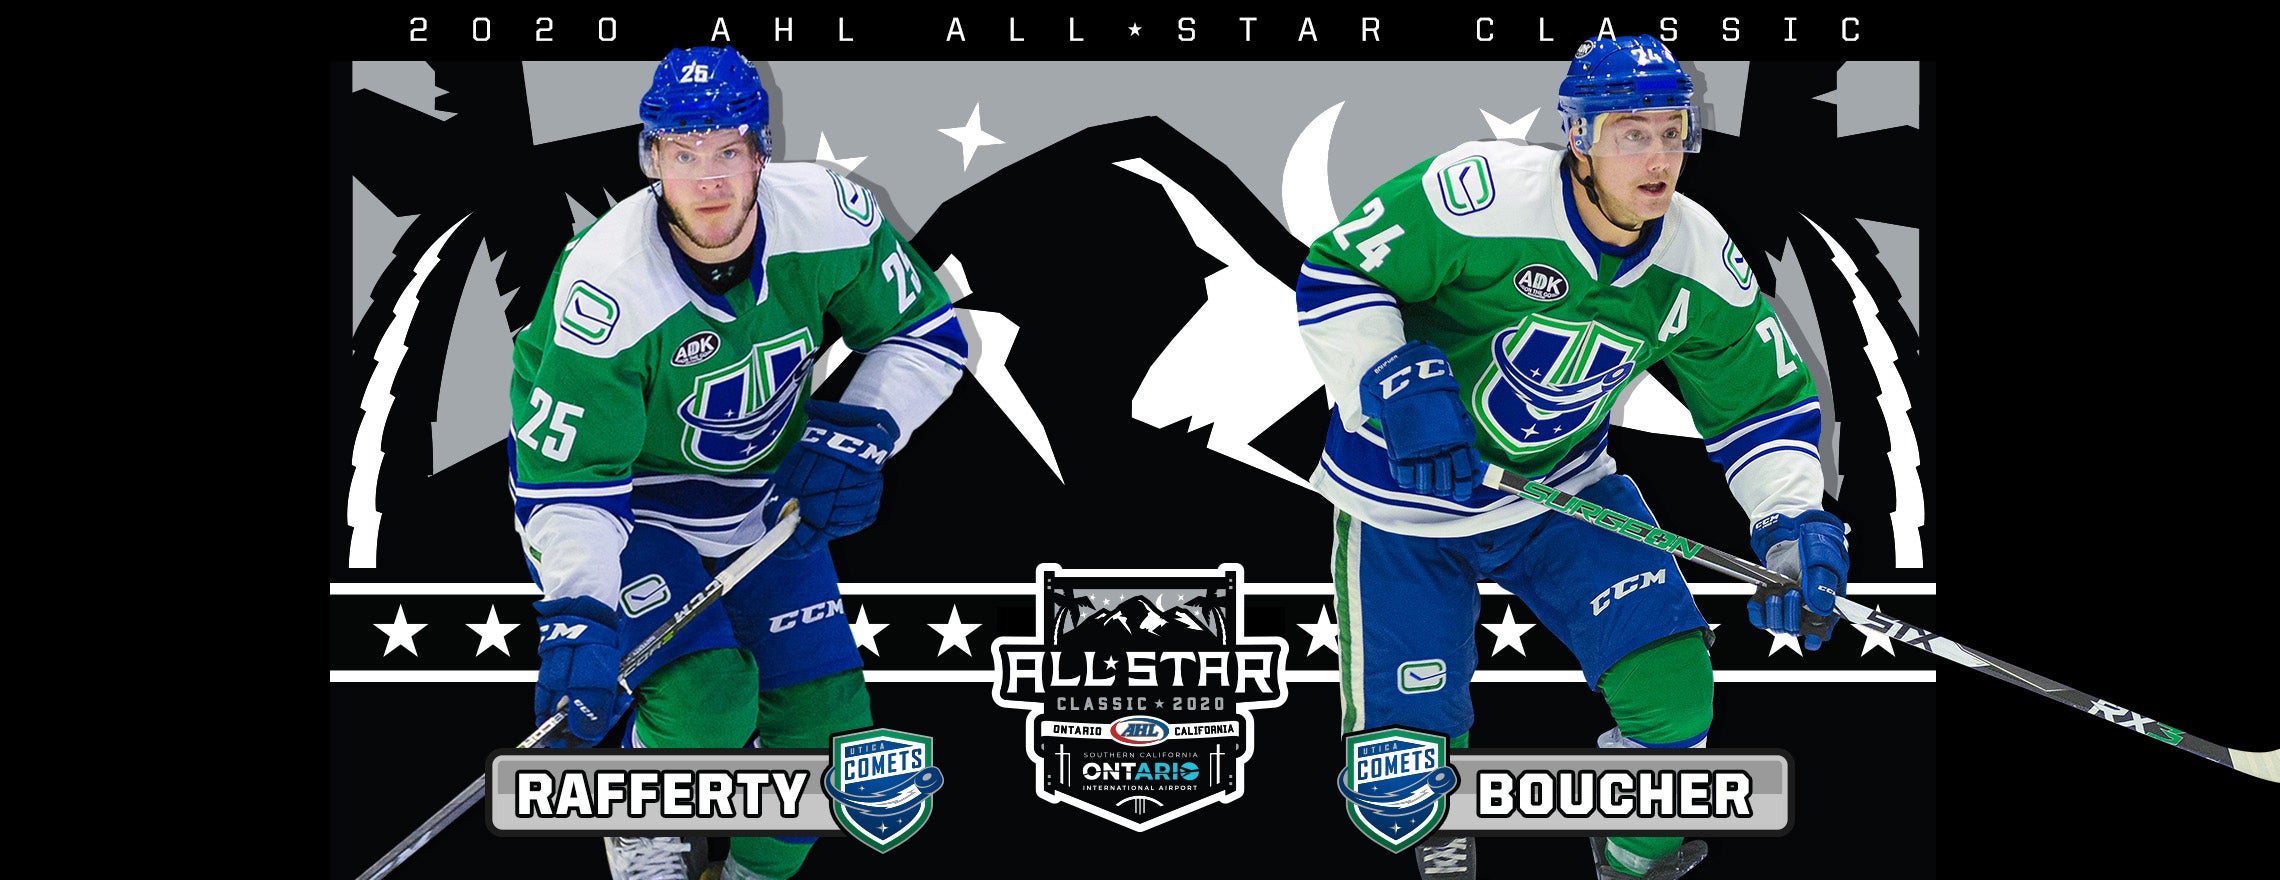 BOUCHER, RAFFERTY NAMED TO AHL ALL-STAR CLASSIC